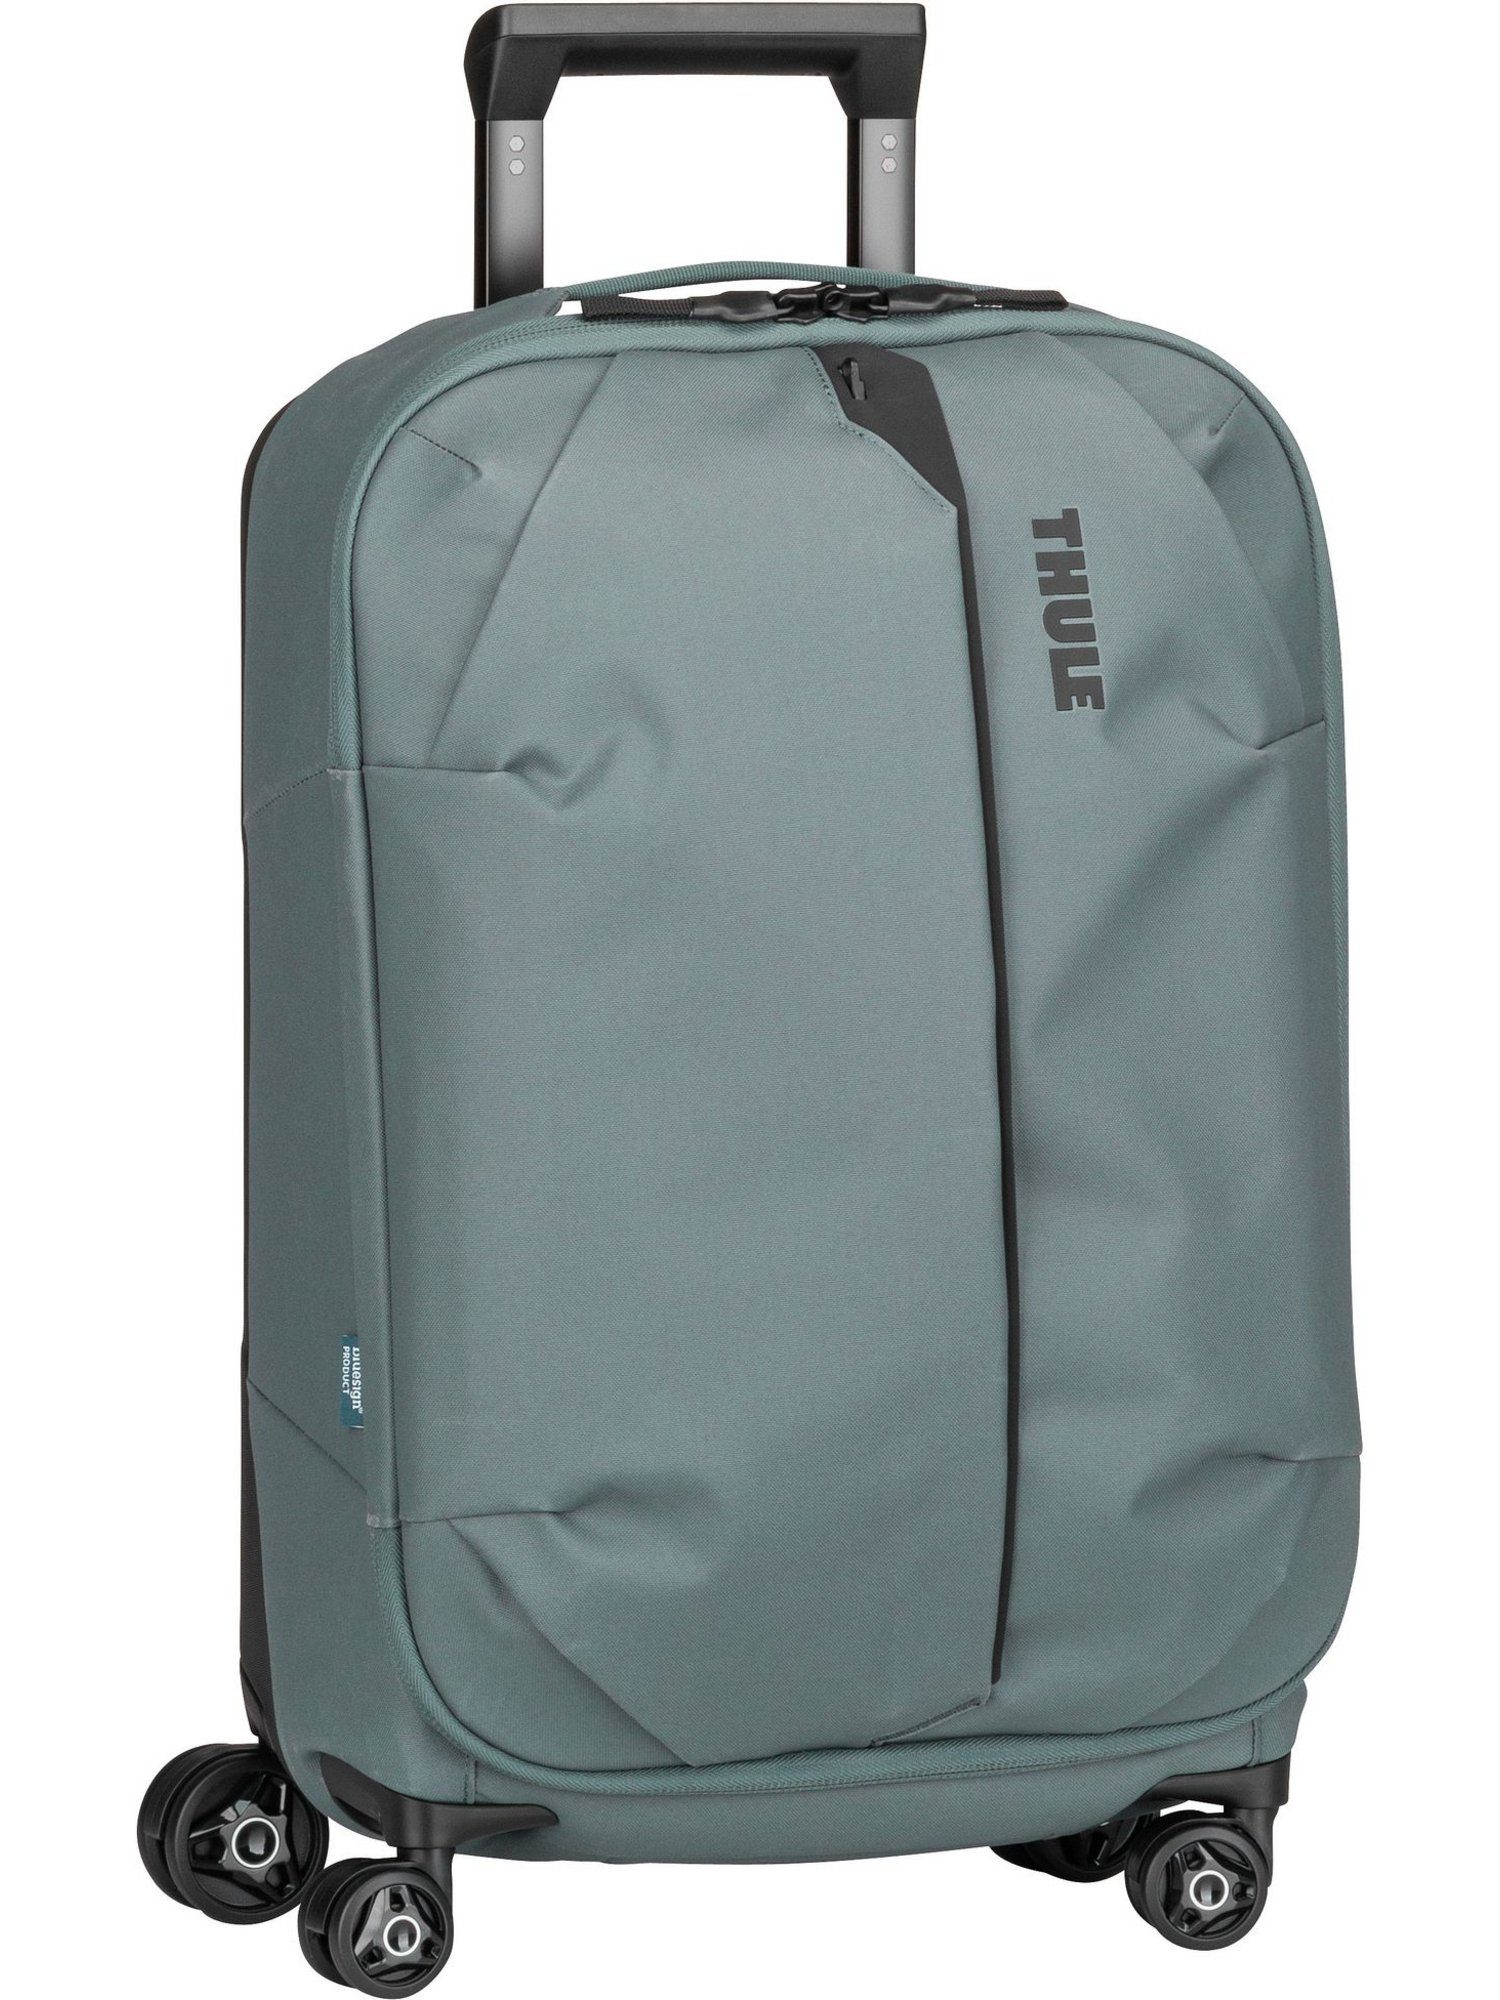 Thule Trolley Aion Carry On Dark Slate Spinner